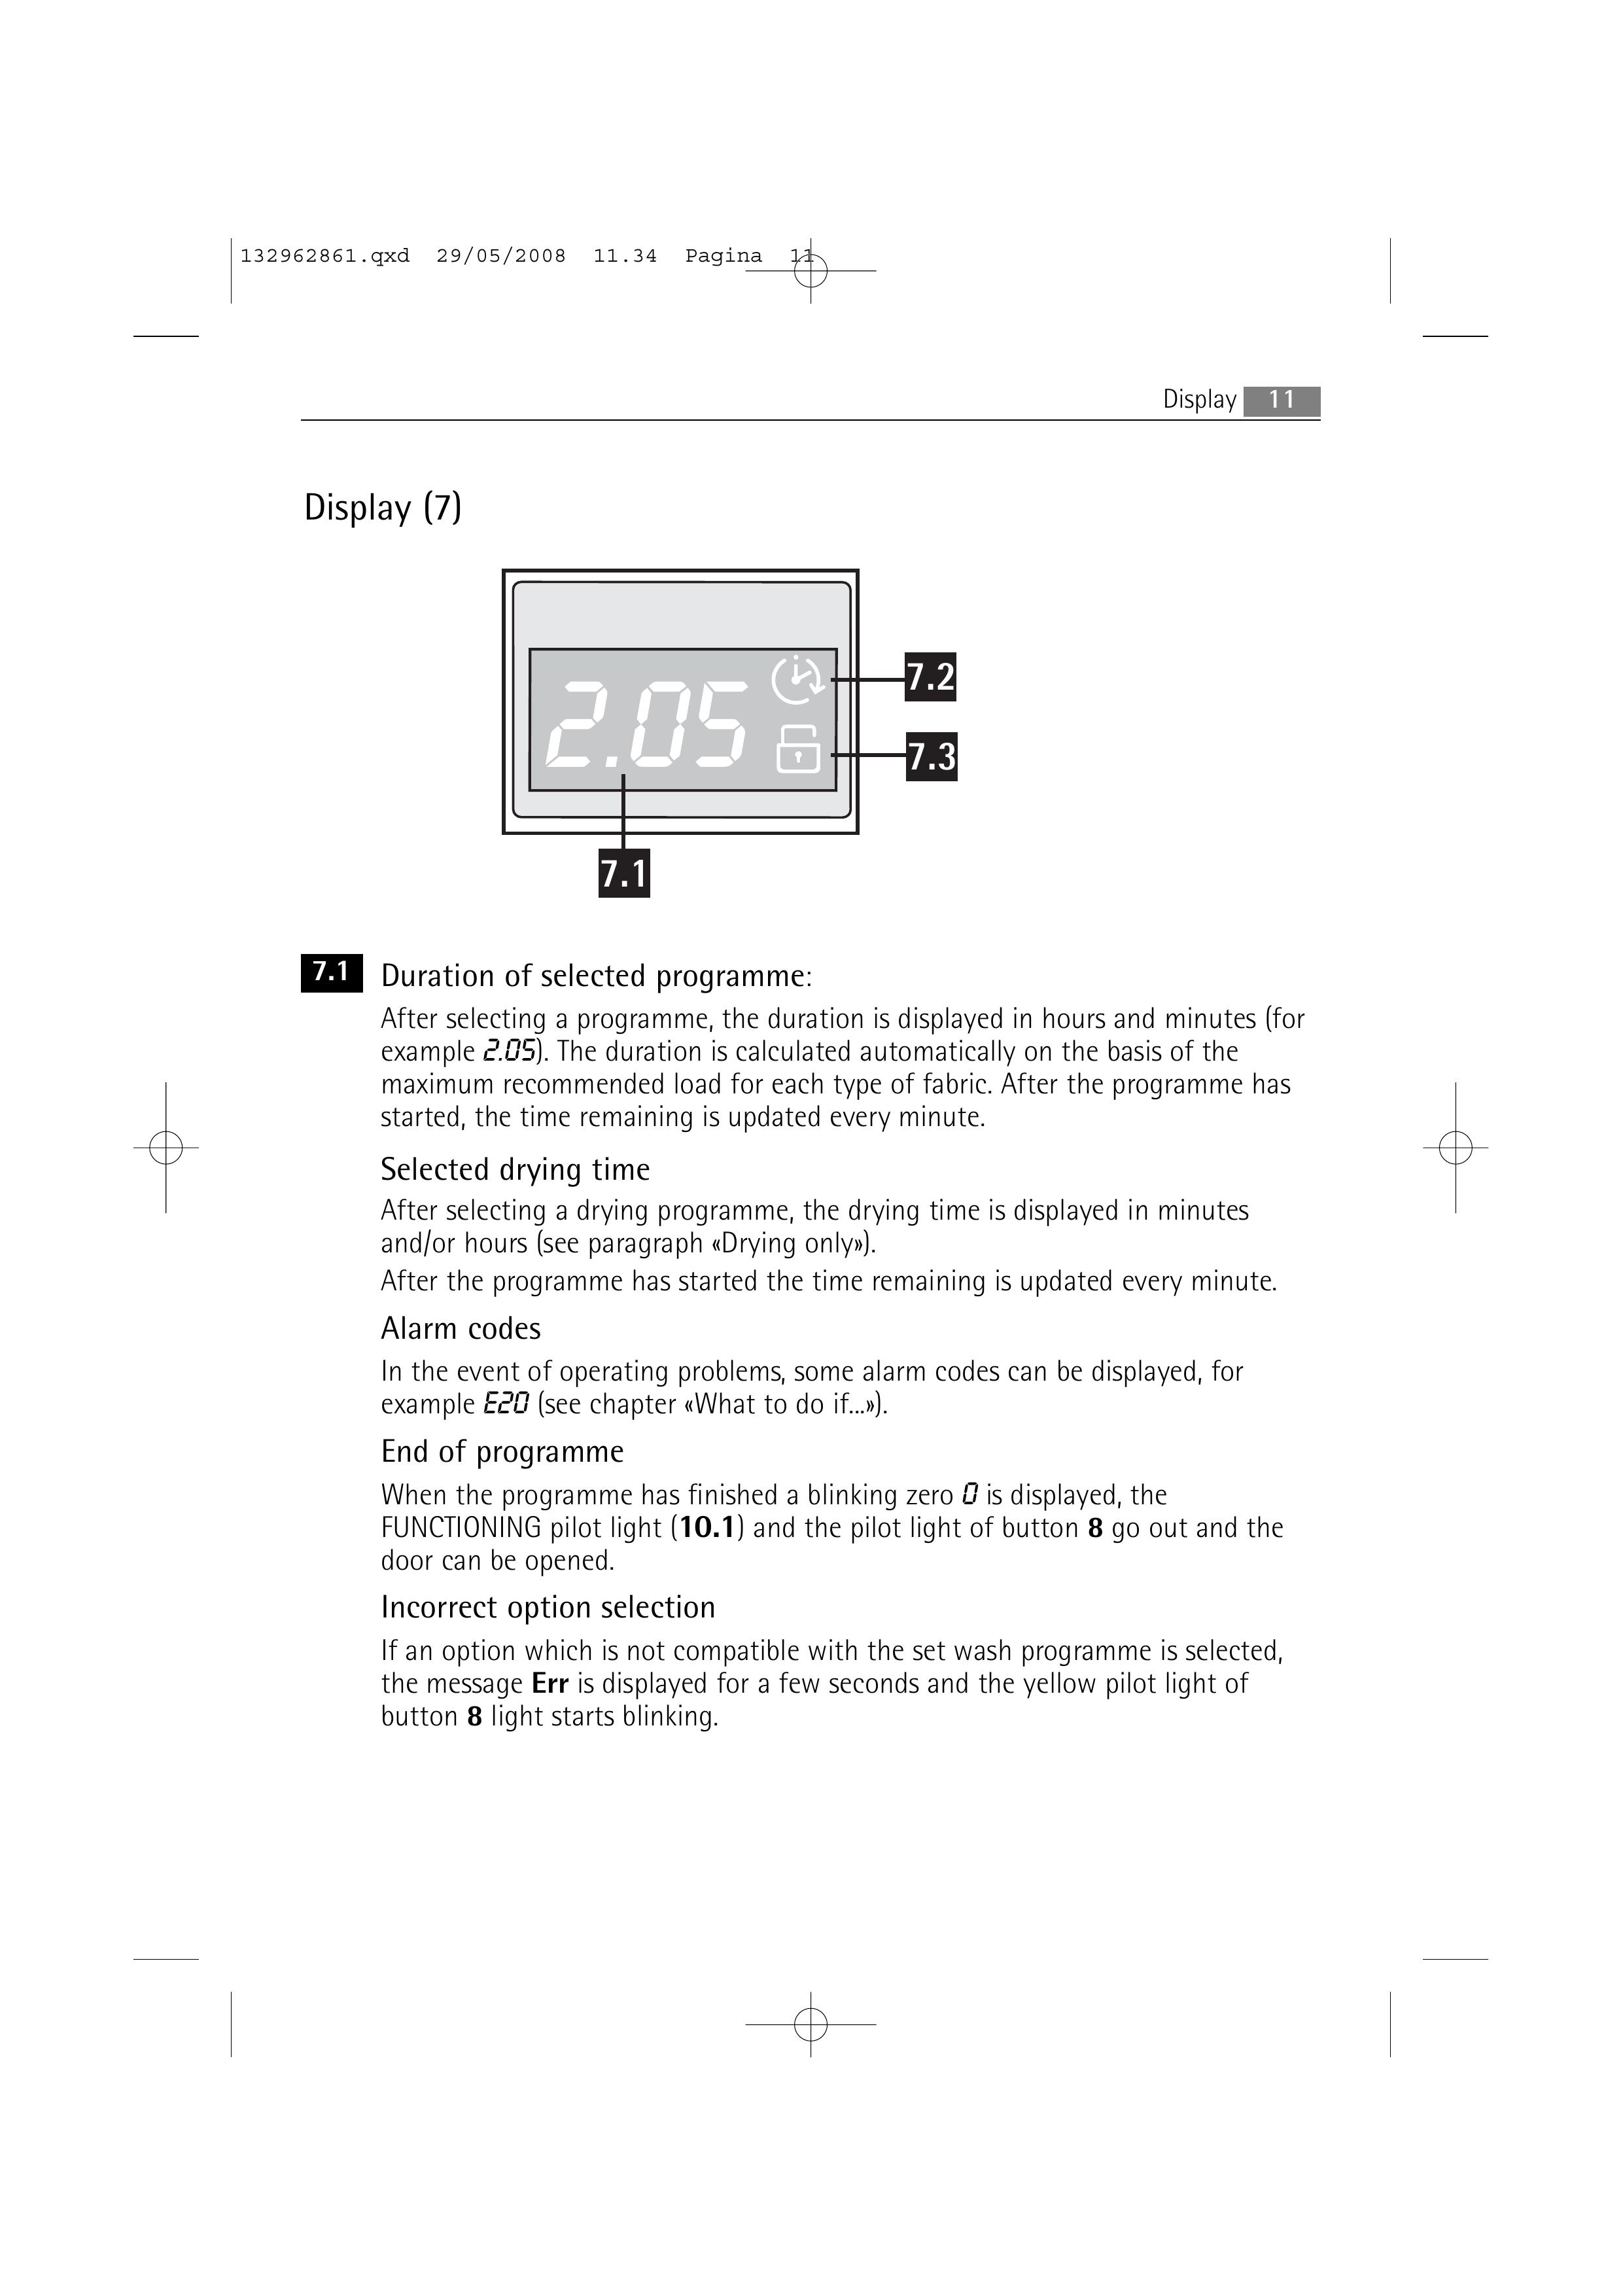 AEG L 14840 Washer/Dryer User Manual (Page 11)